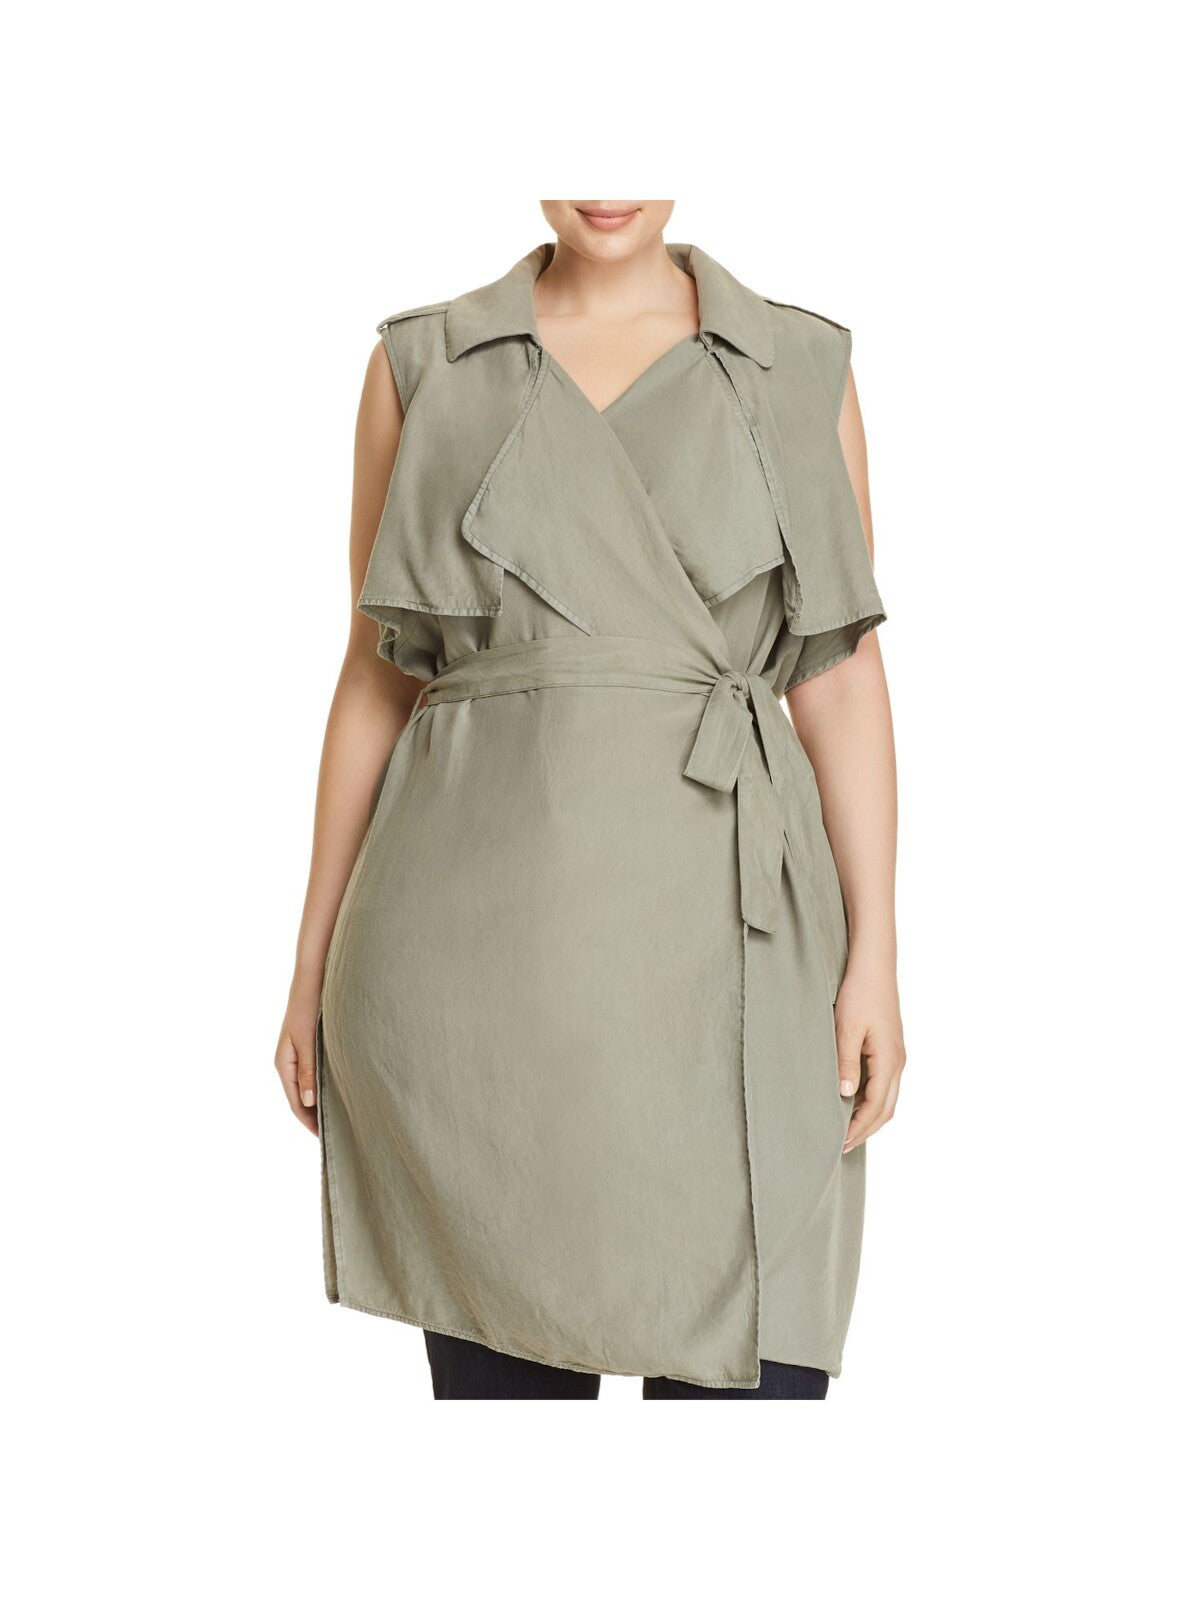 BAGATELLE Womens Green Pocketed Belted Trench Collared Top Plus 1X